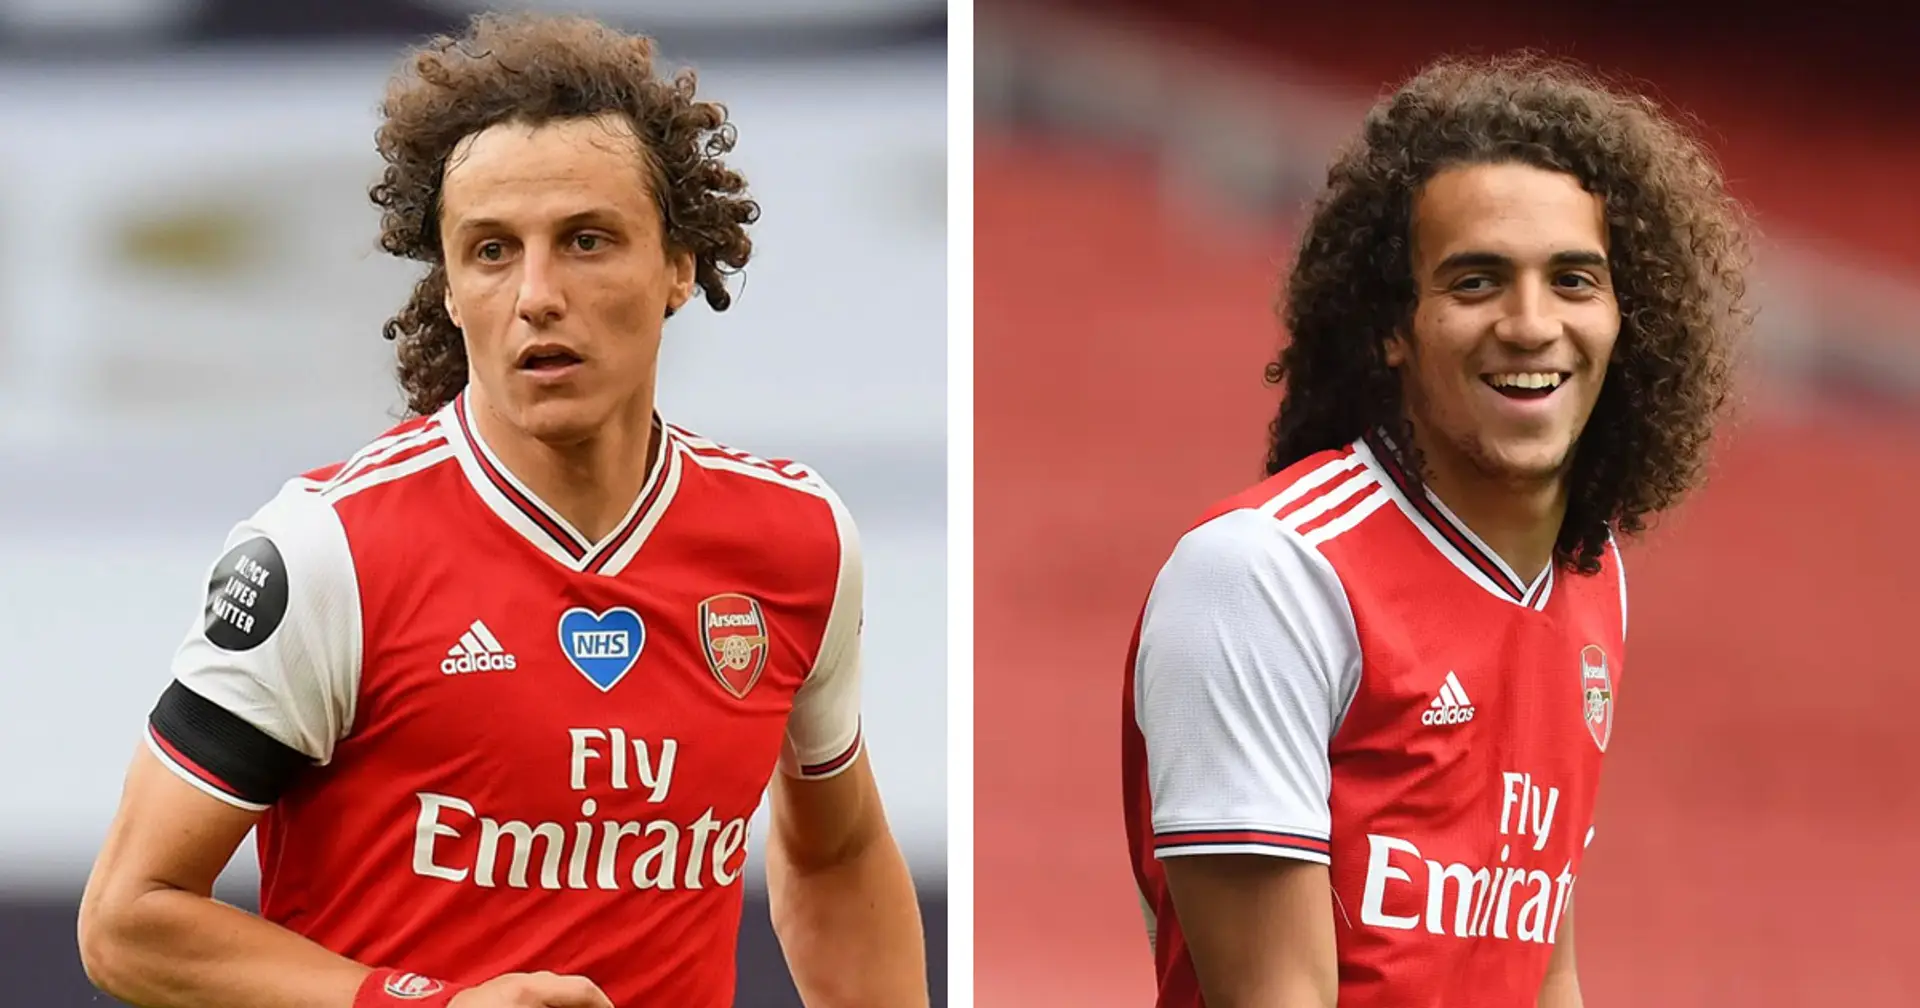 Guendouzi returns to training with first team